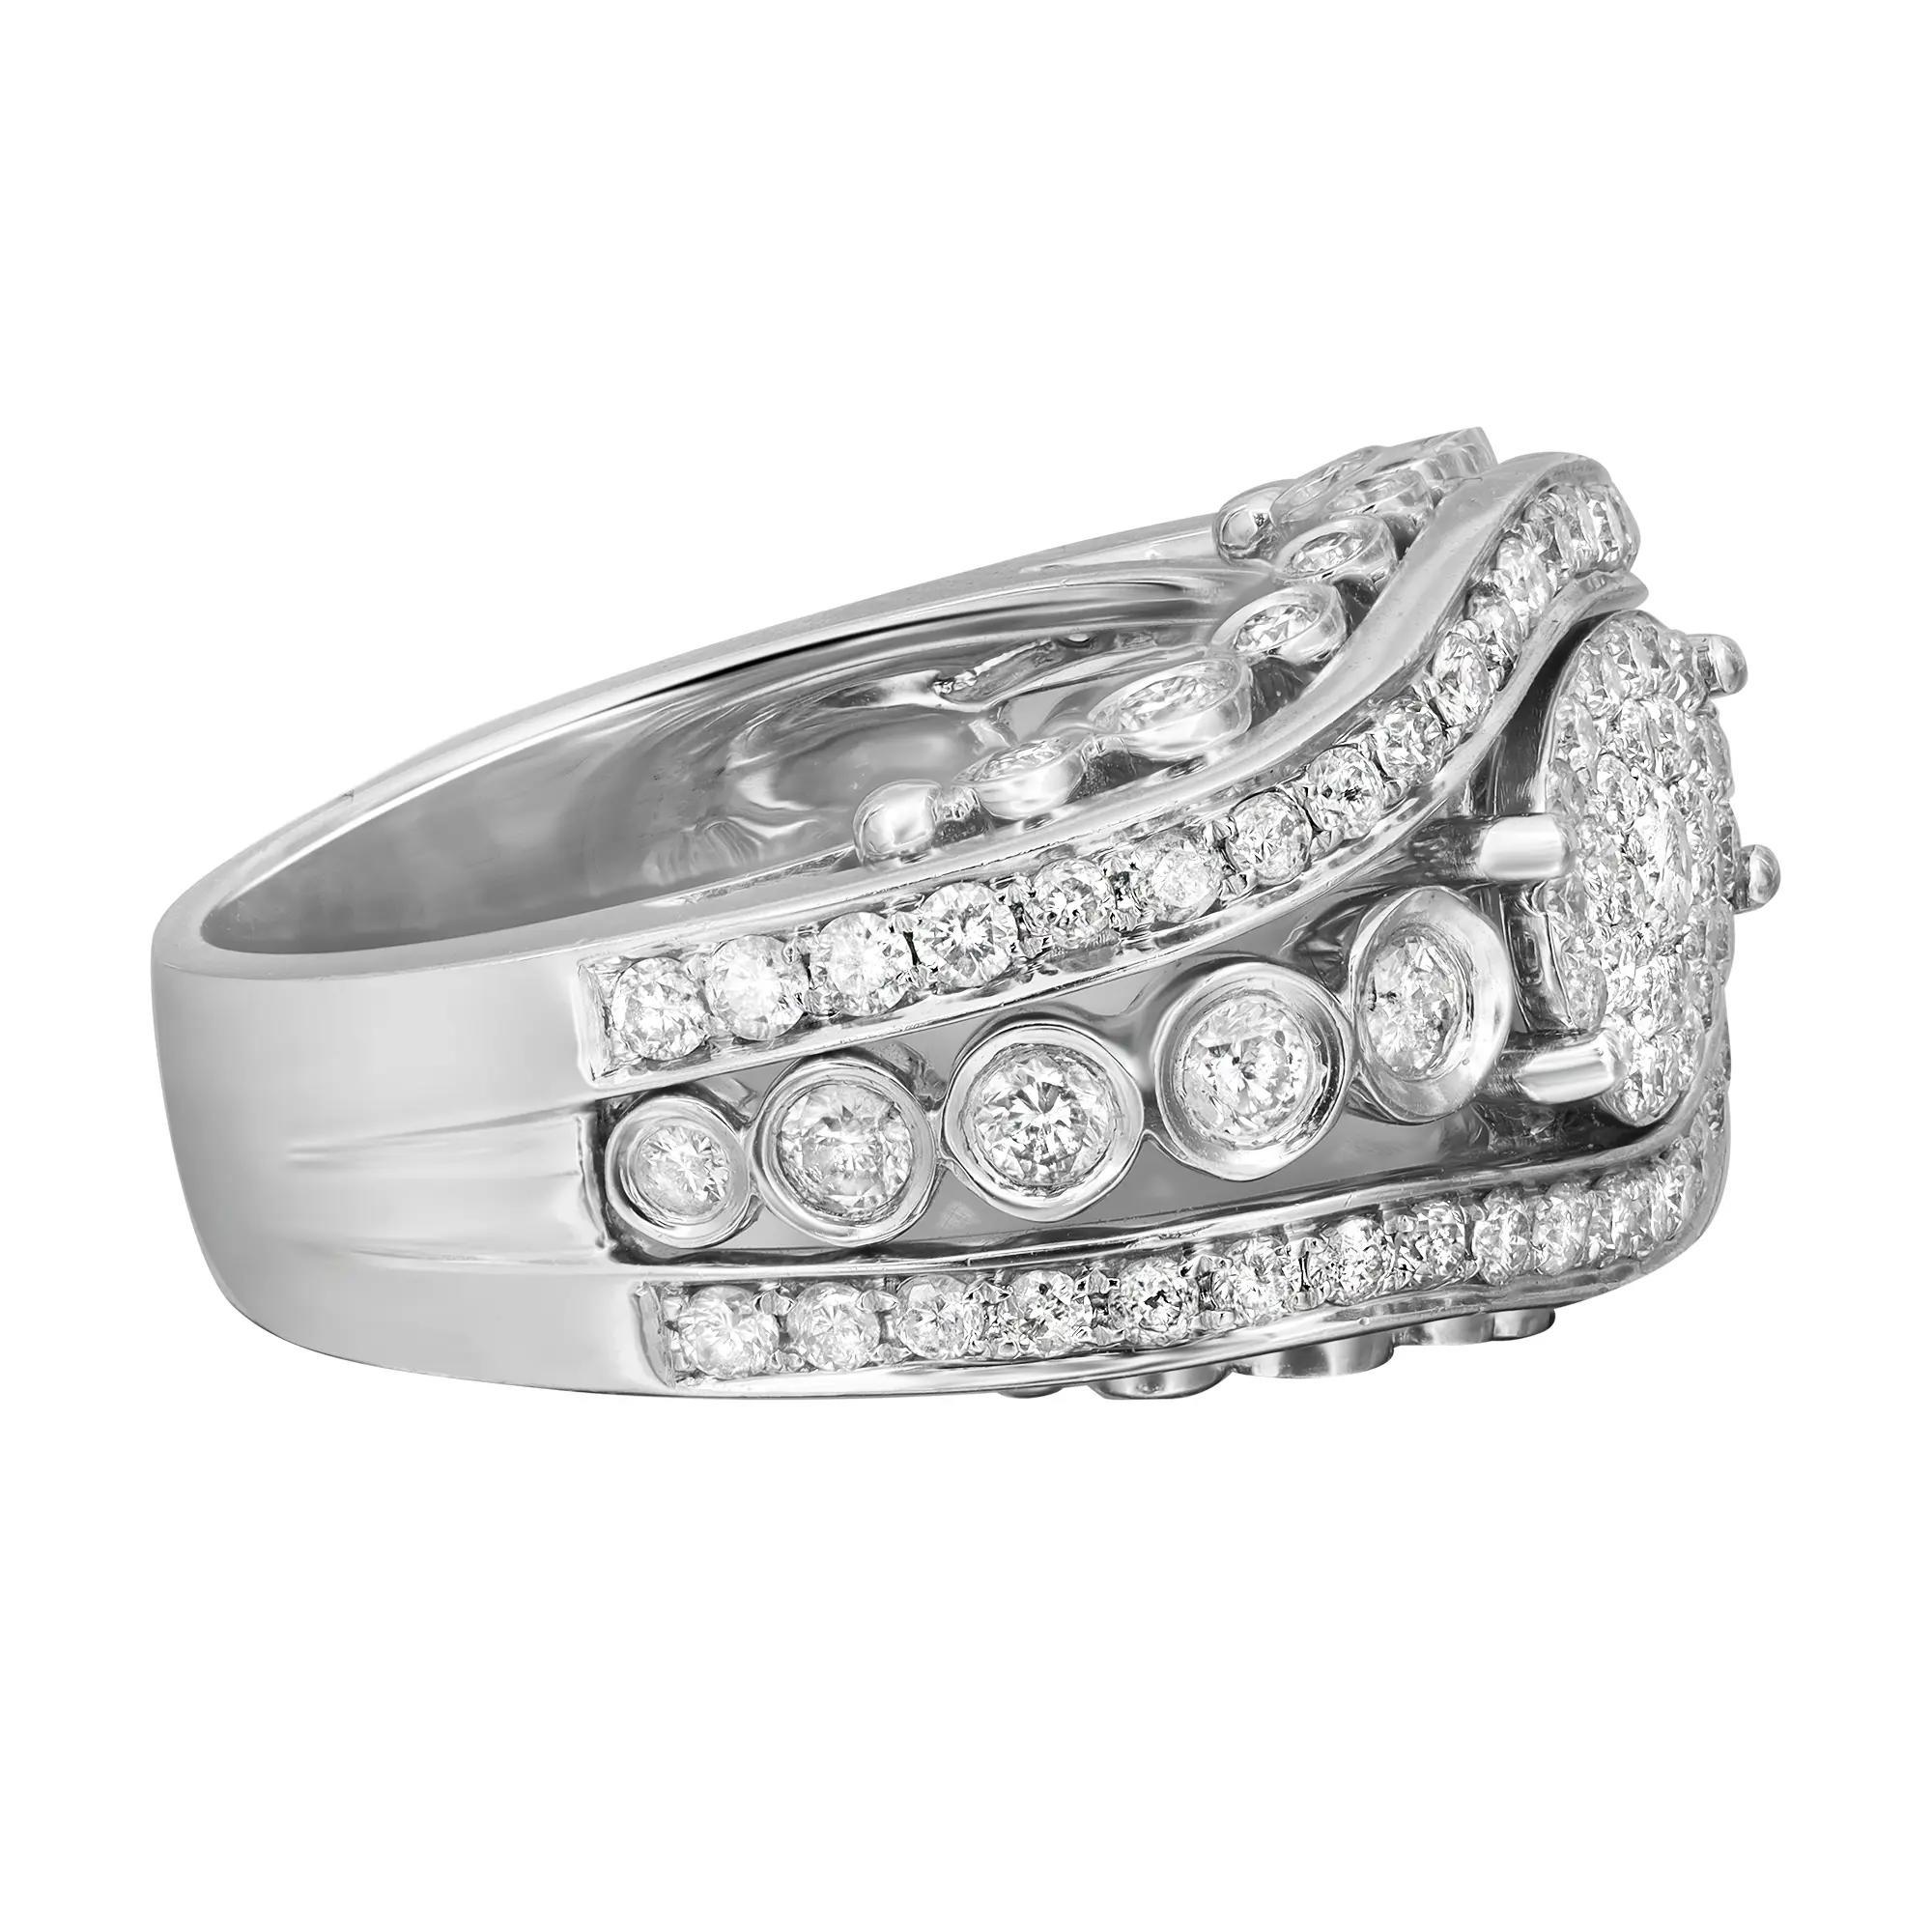 Modern 1.56cttw Pave and Bezel Set Round Diamond Cocktail Ring 14k White Gold For Sale